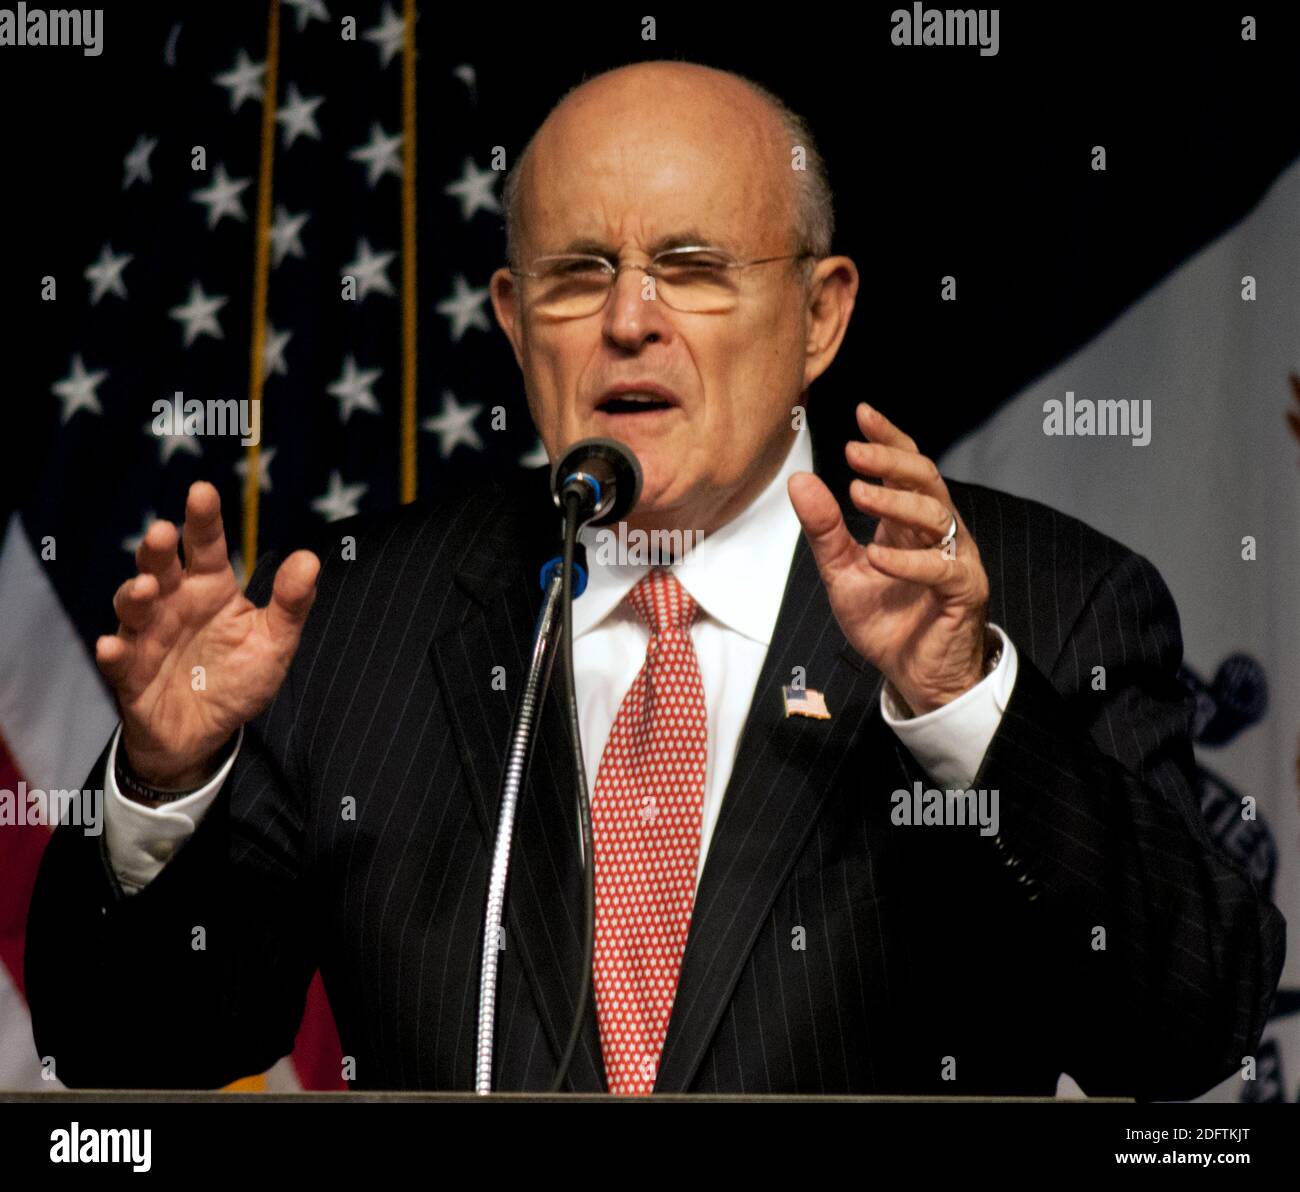 Clive, Iowa, USA. 13th Sep, 2016. Former New York CIty Mayor Rudy Giuliani warms up the crowd of 1600 supporters at a Donald Trump capaign rally today. Credit: Mark Reinstein/Media Punch/Alamy Live News Stock Photo